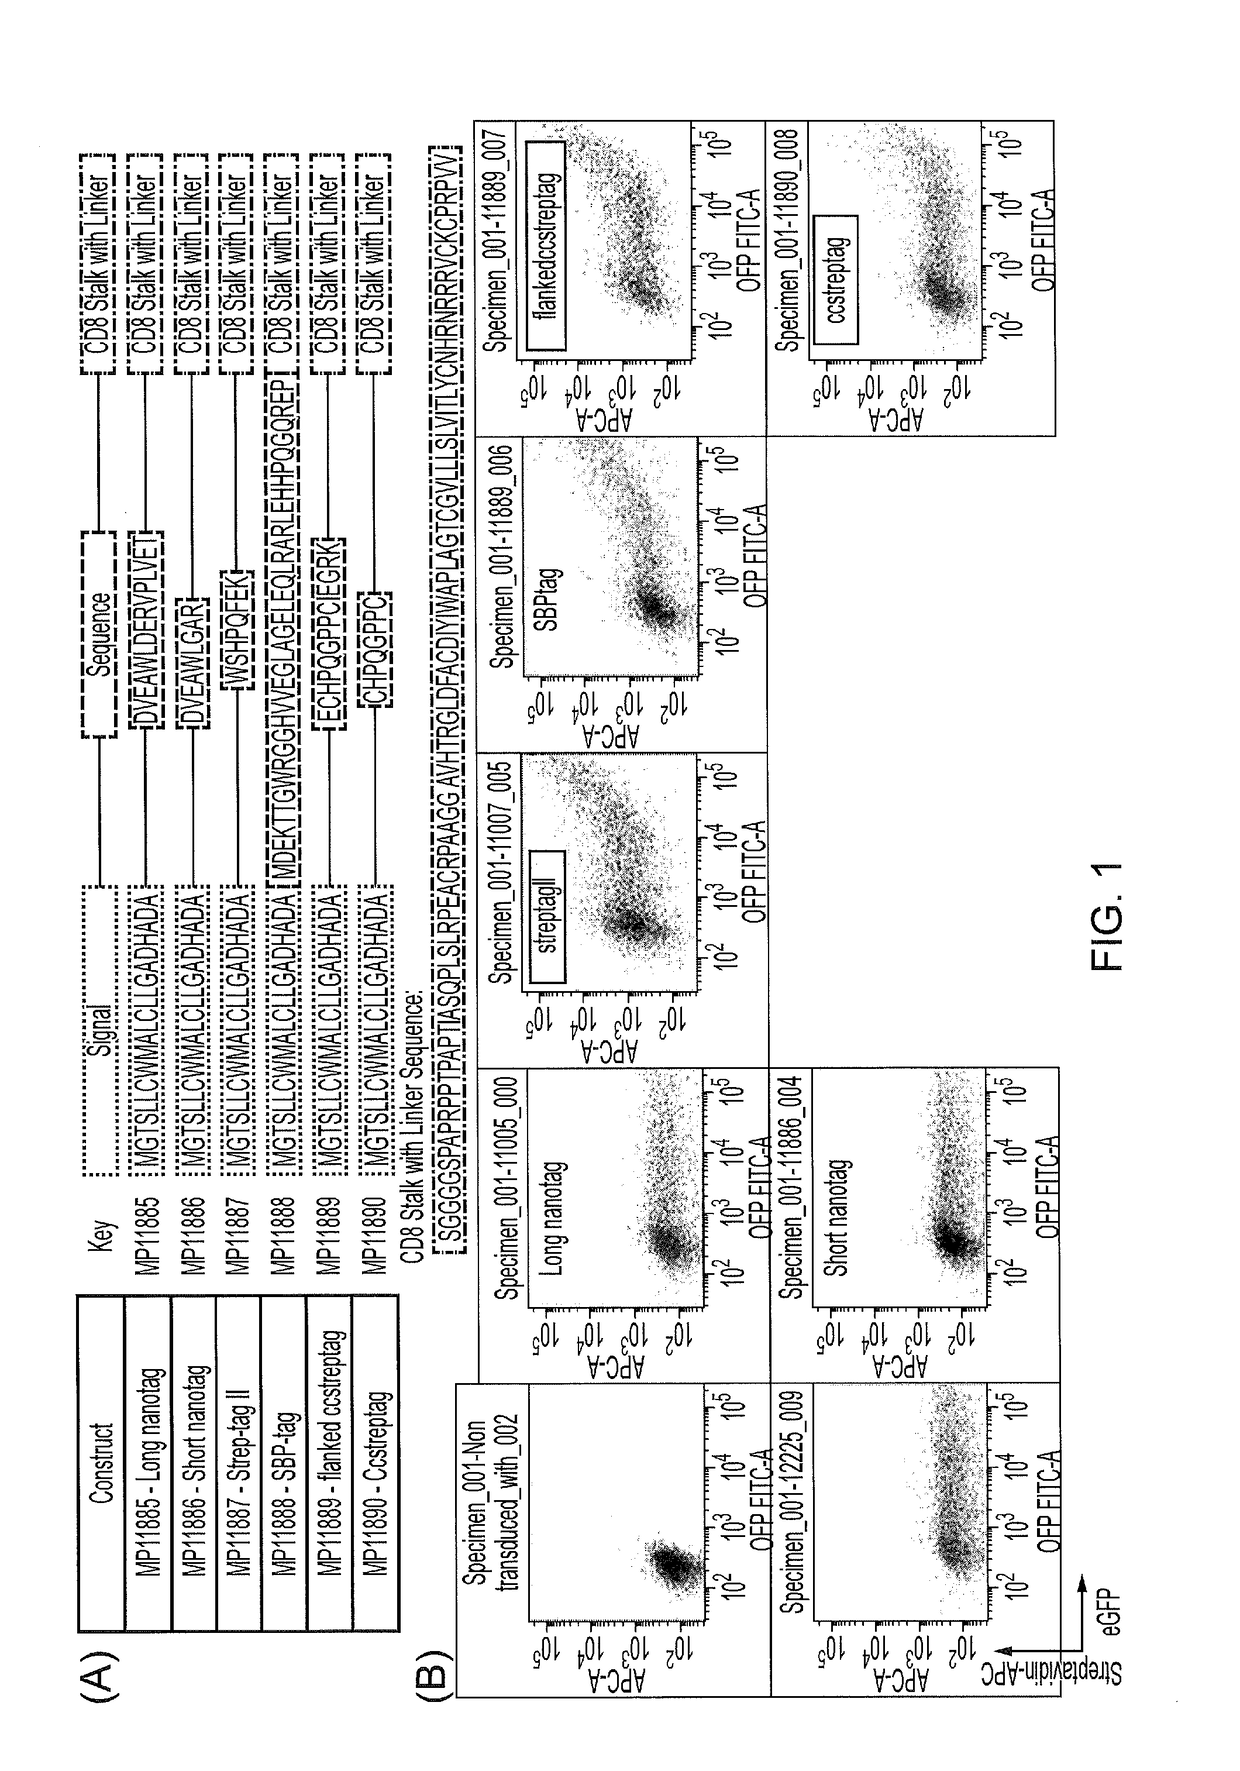 Method and means for purifying retroviral vectors